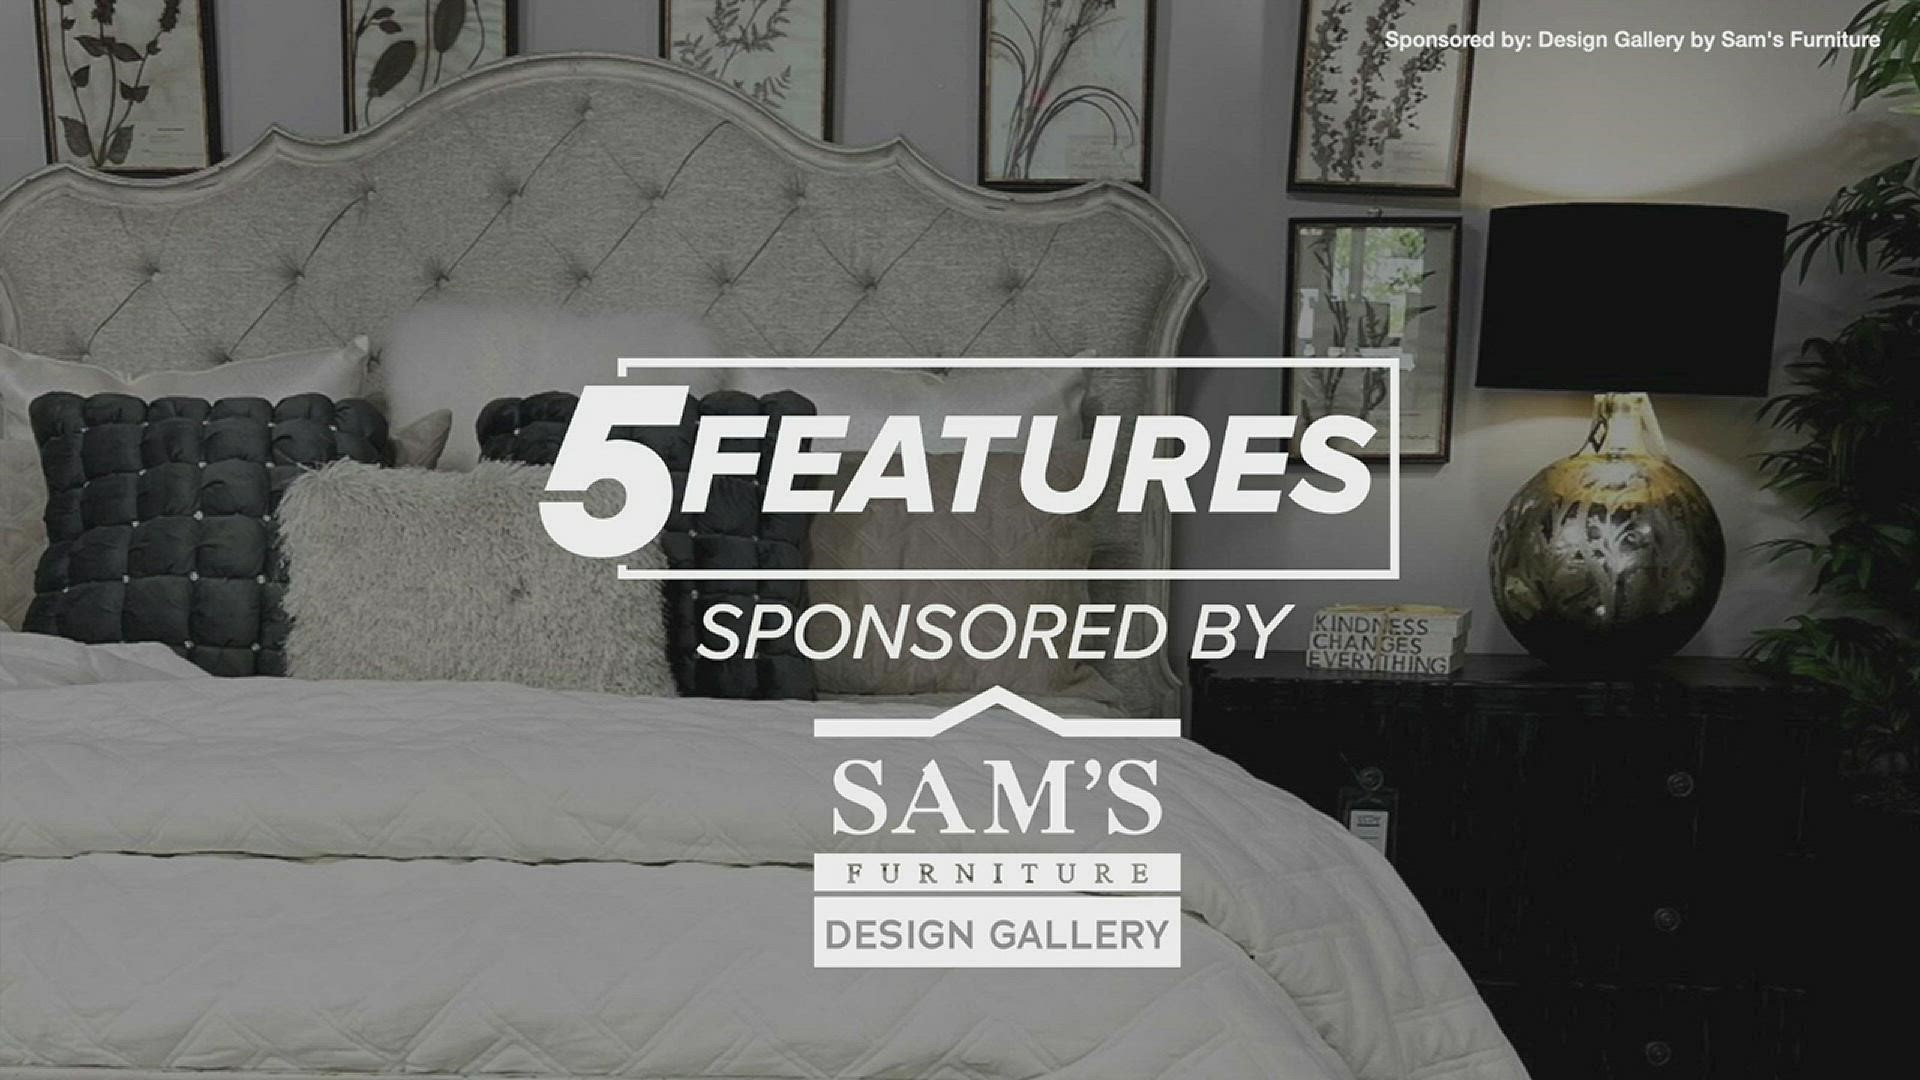 Sponsored by: Design Gallery by Sam's Furniture